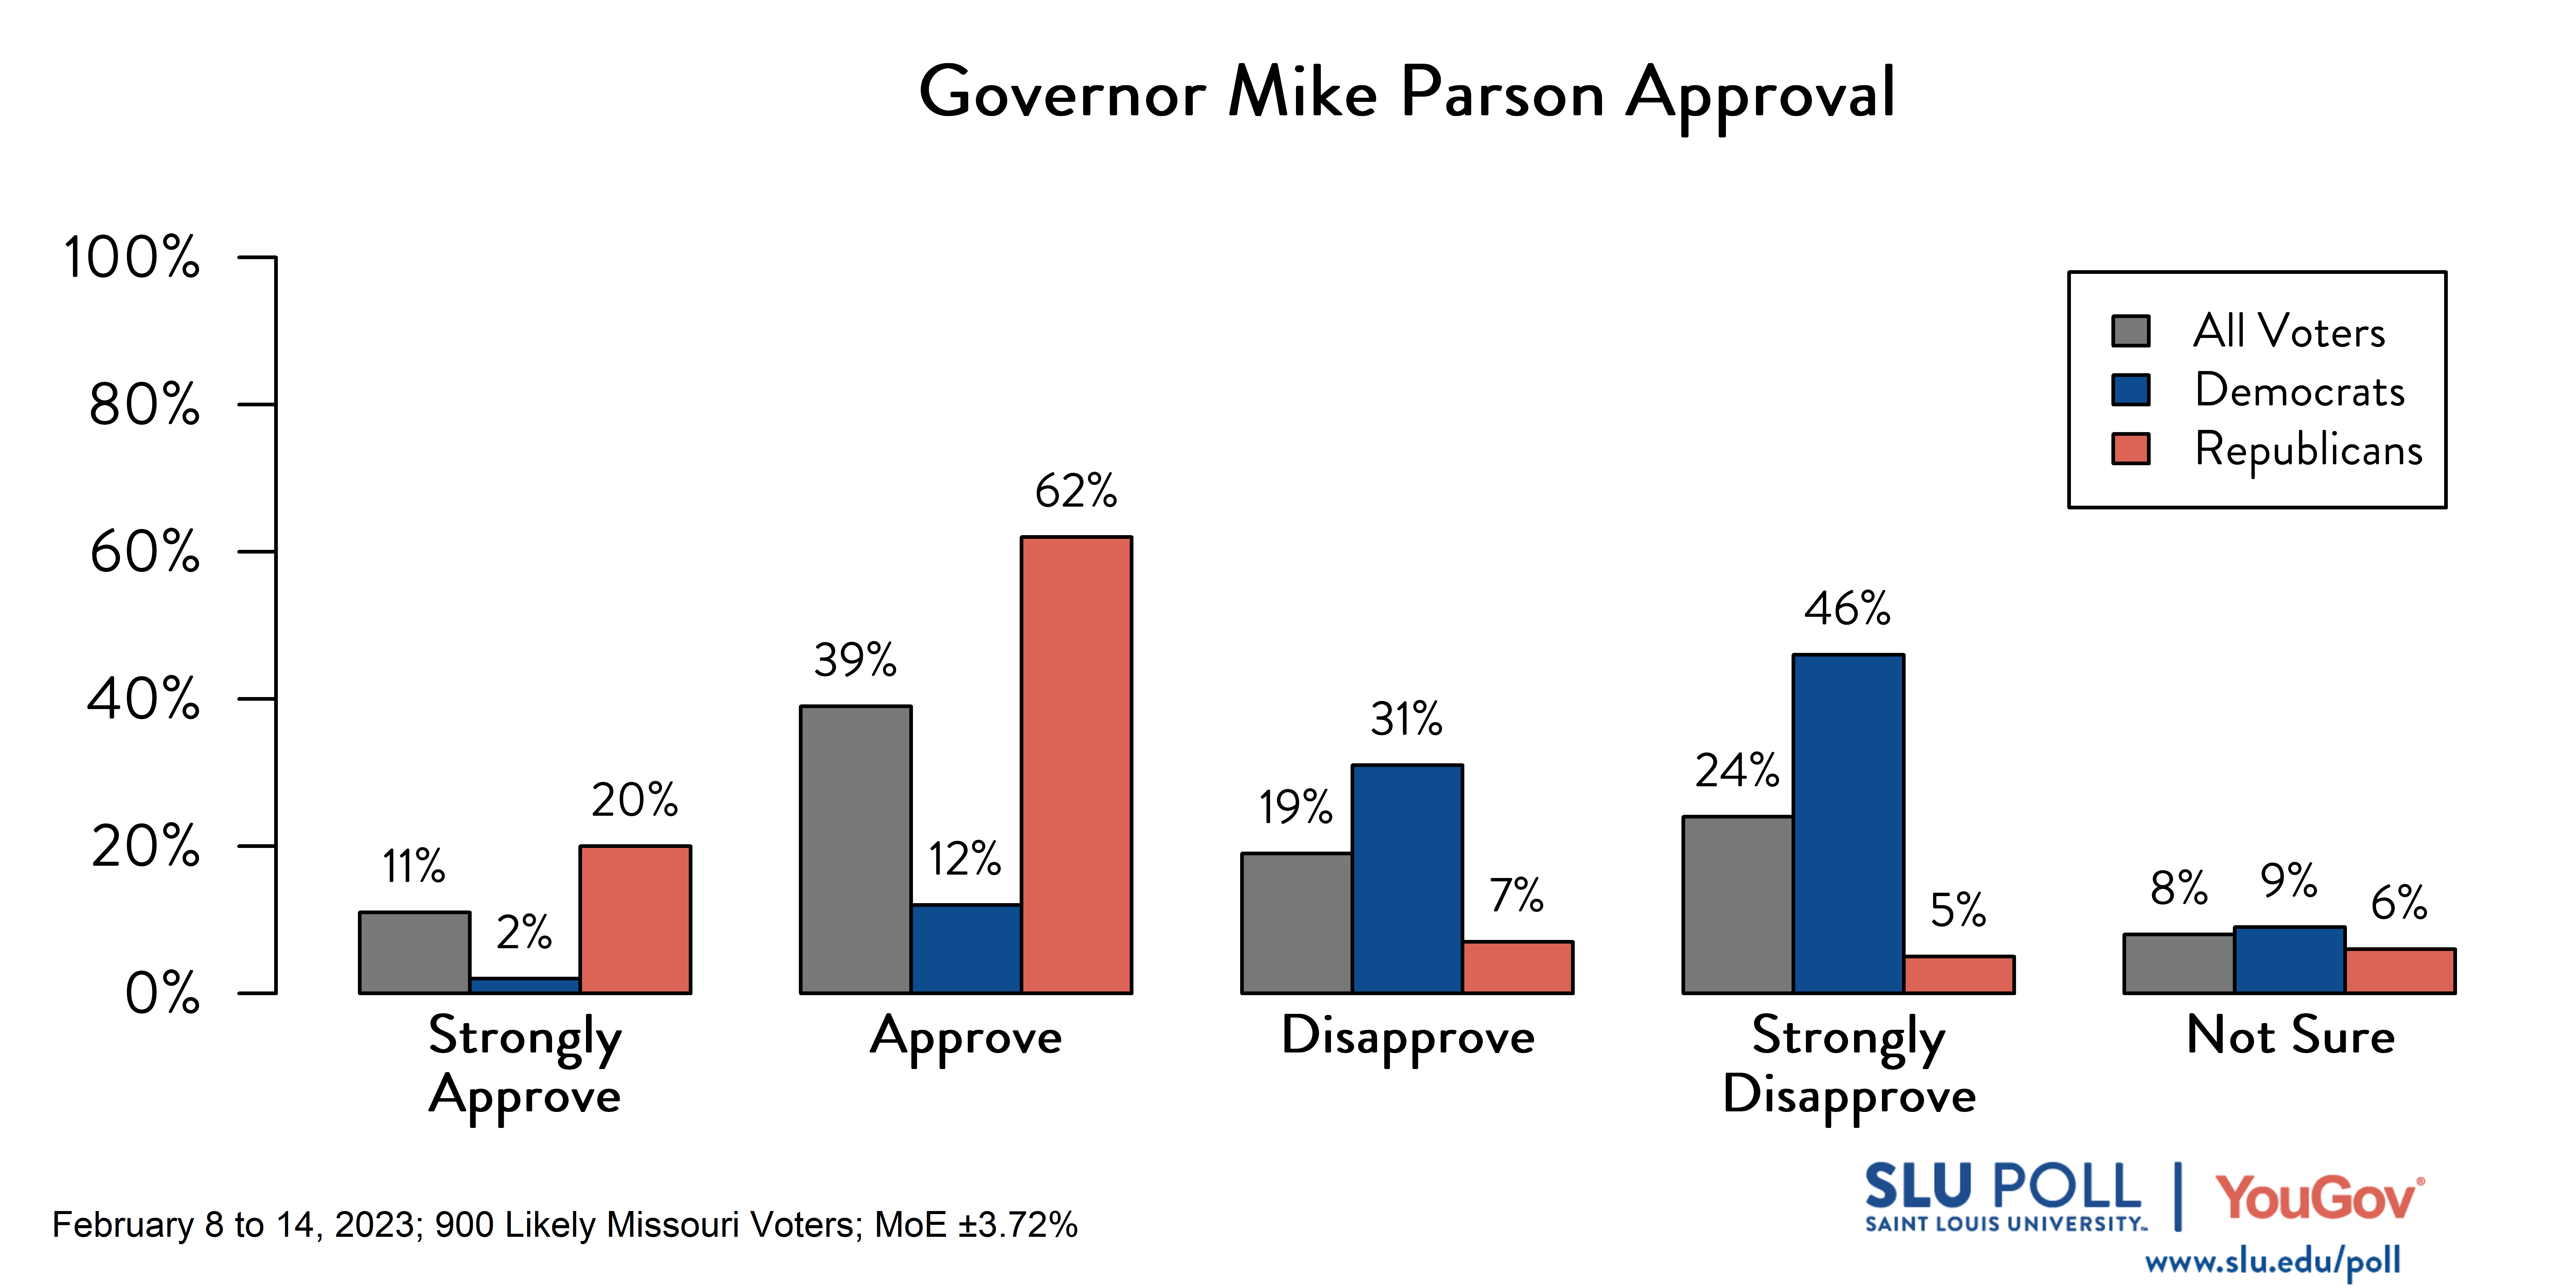 Likely voters' responses to 'Do you approve or disapprove of the way each is doing their job: Governor Mike Parson?': 11% Strongly approve, 39% Approve, 19% Disapprove, 24% Strongly disapprove, and 8% Not sure. Democratic voters' responses: ' 2% Strongly approve, 12% Approve, 31% Disapprove, 46% Strongly disapprove, and 9% Not sure. Republican voters' responses: 20% Strongly approve, 62% Approve, 7% Disapprove, 5% Strongly disapprove, and 6% Not sure.